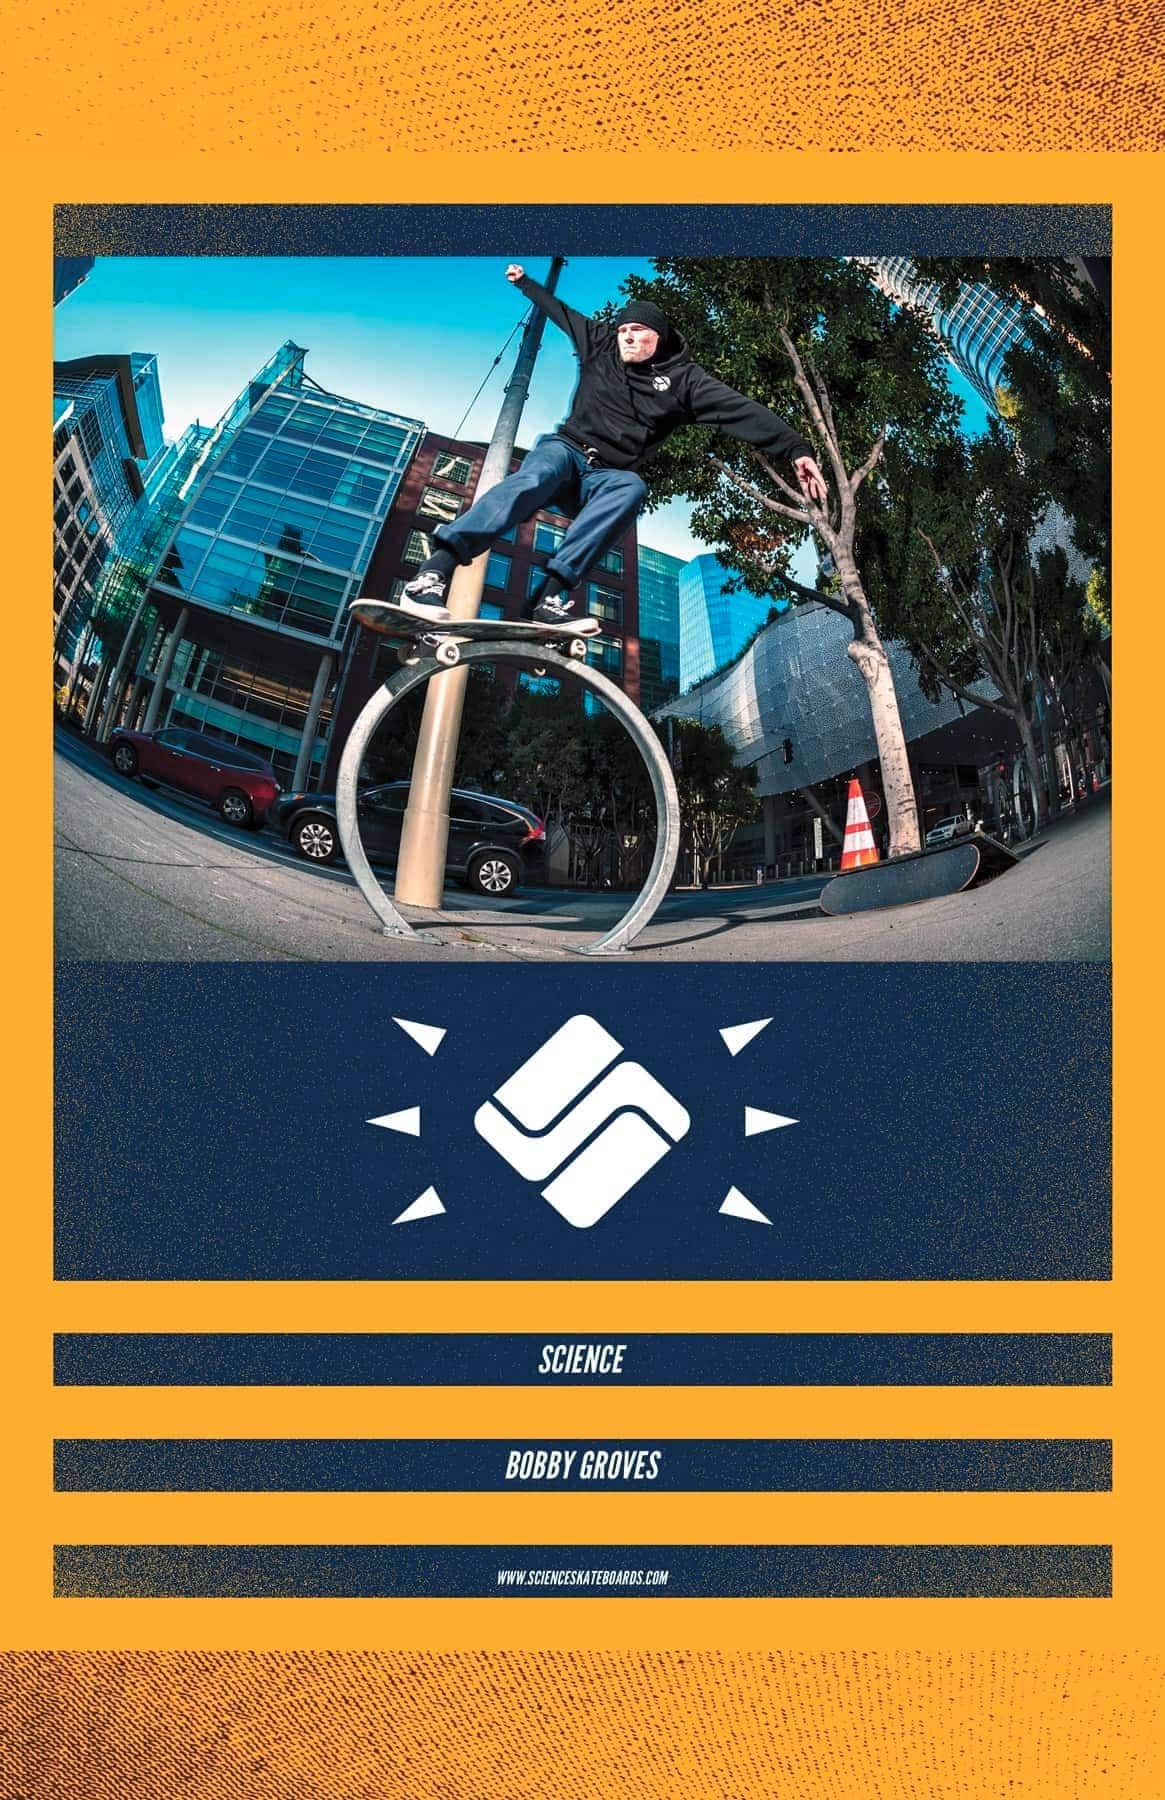 skate jawn skateboard magazine ad san francisco photography and graphic design by chris morgan creative